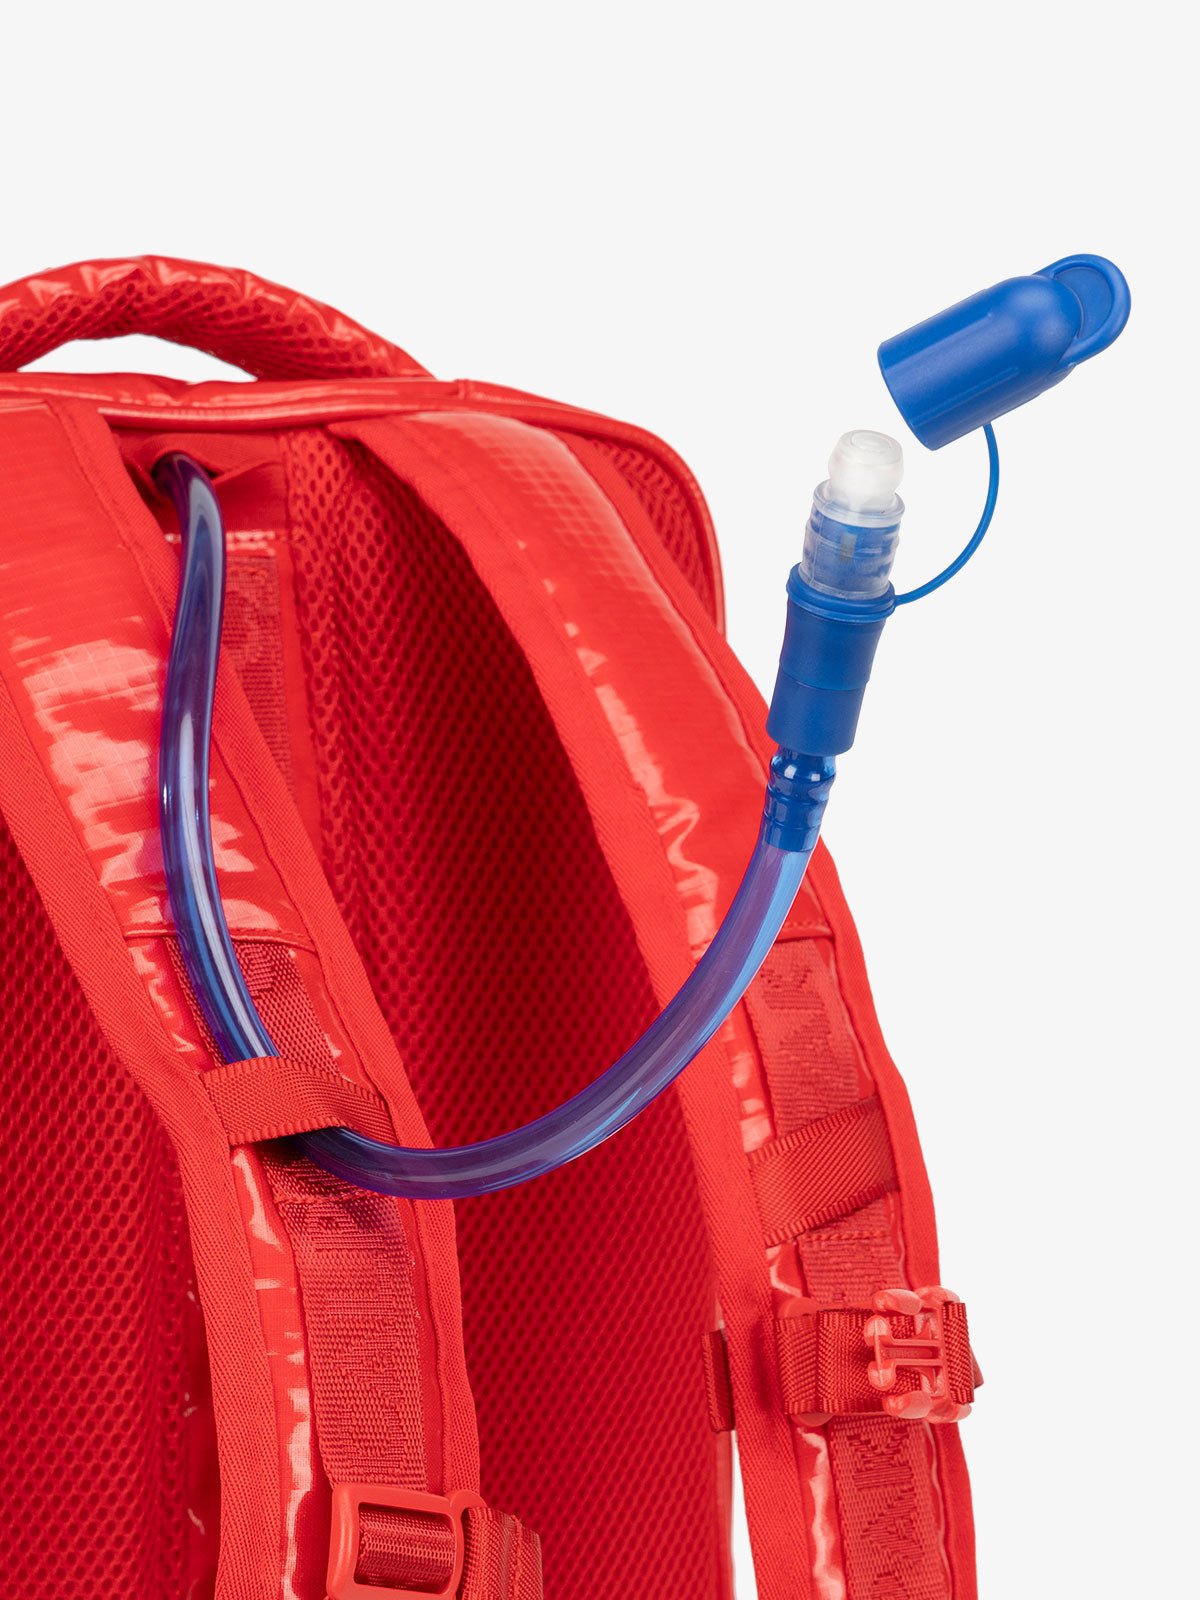 Close up of removable hydration reservoir straw with valve cap in red